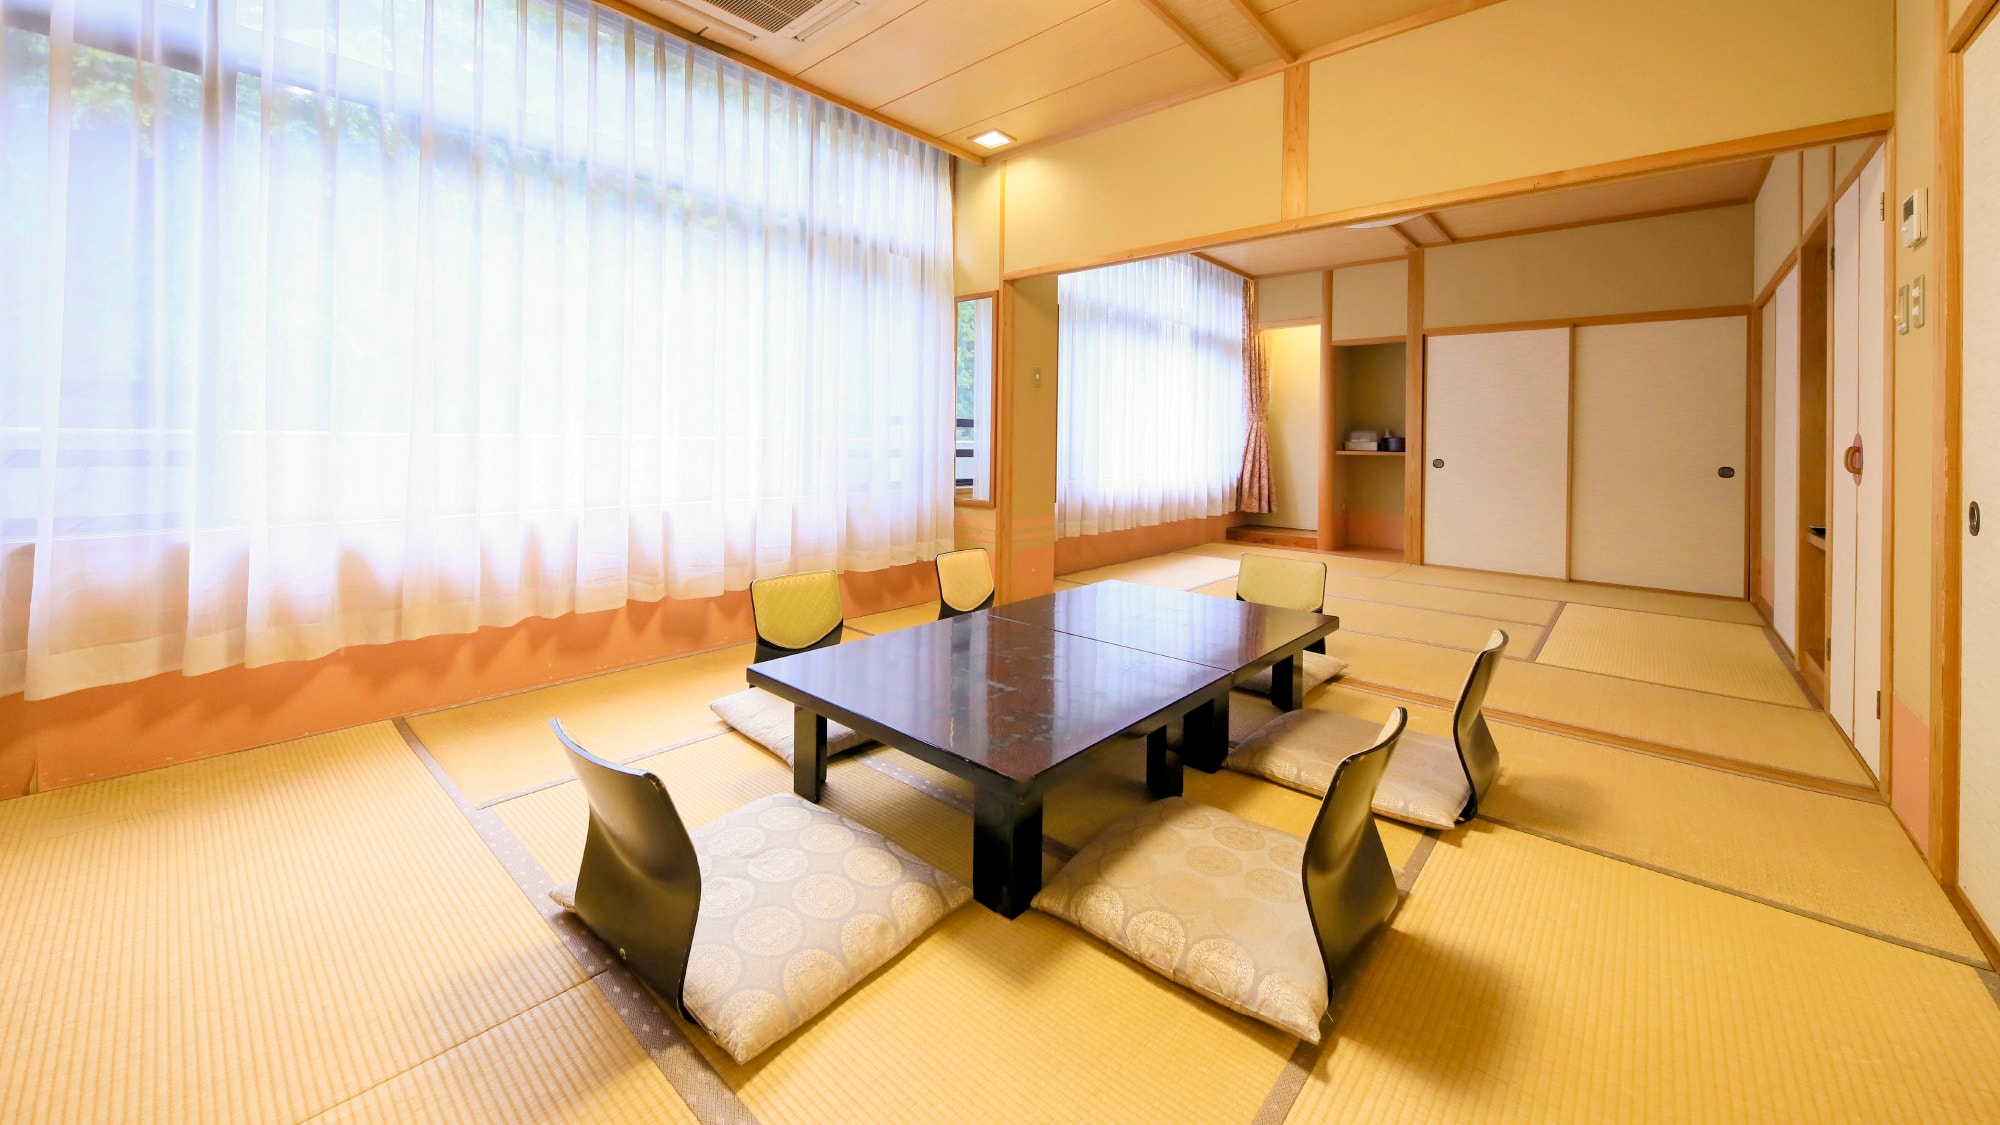 ・An example of a Japanese-style room: A room with large windows on one wall